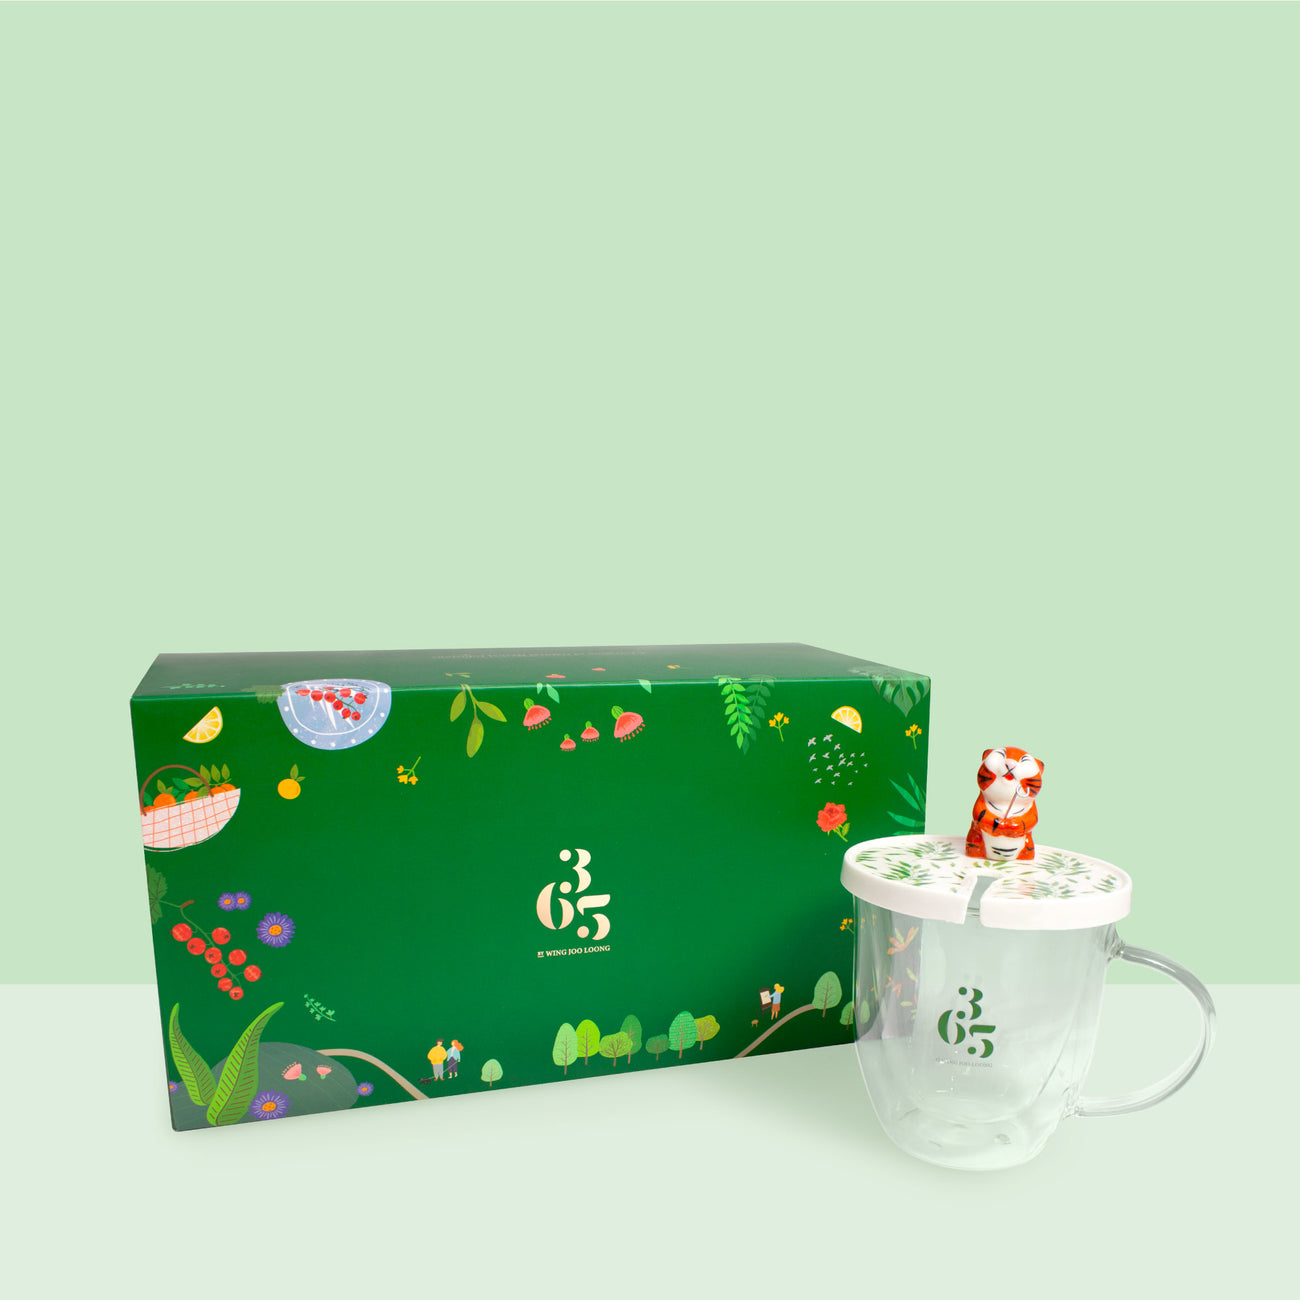 365 by Wing Joo Loong Tea Buddy Gift Set 茶杯礼盒